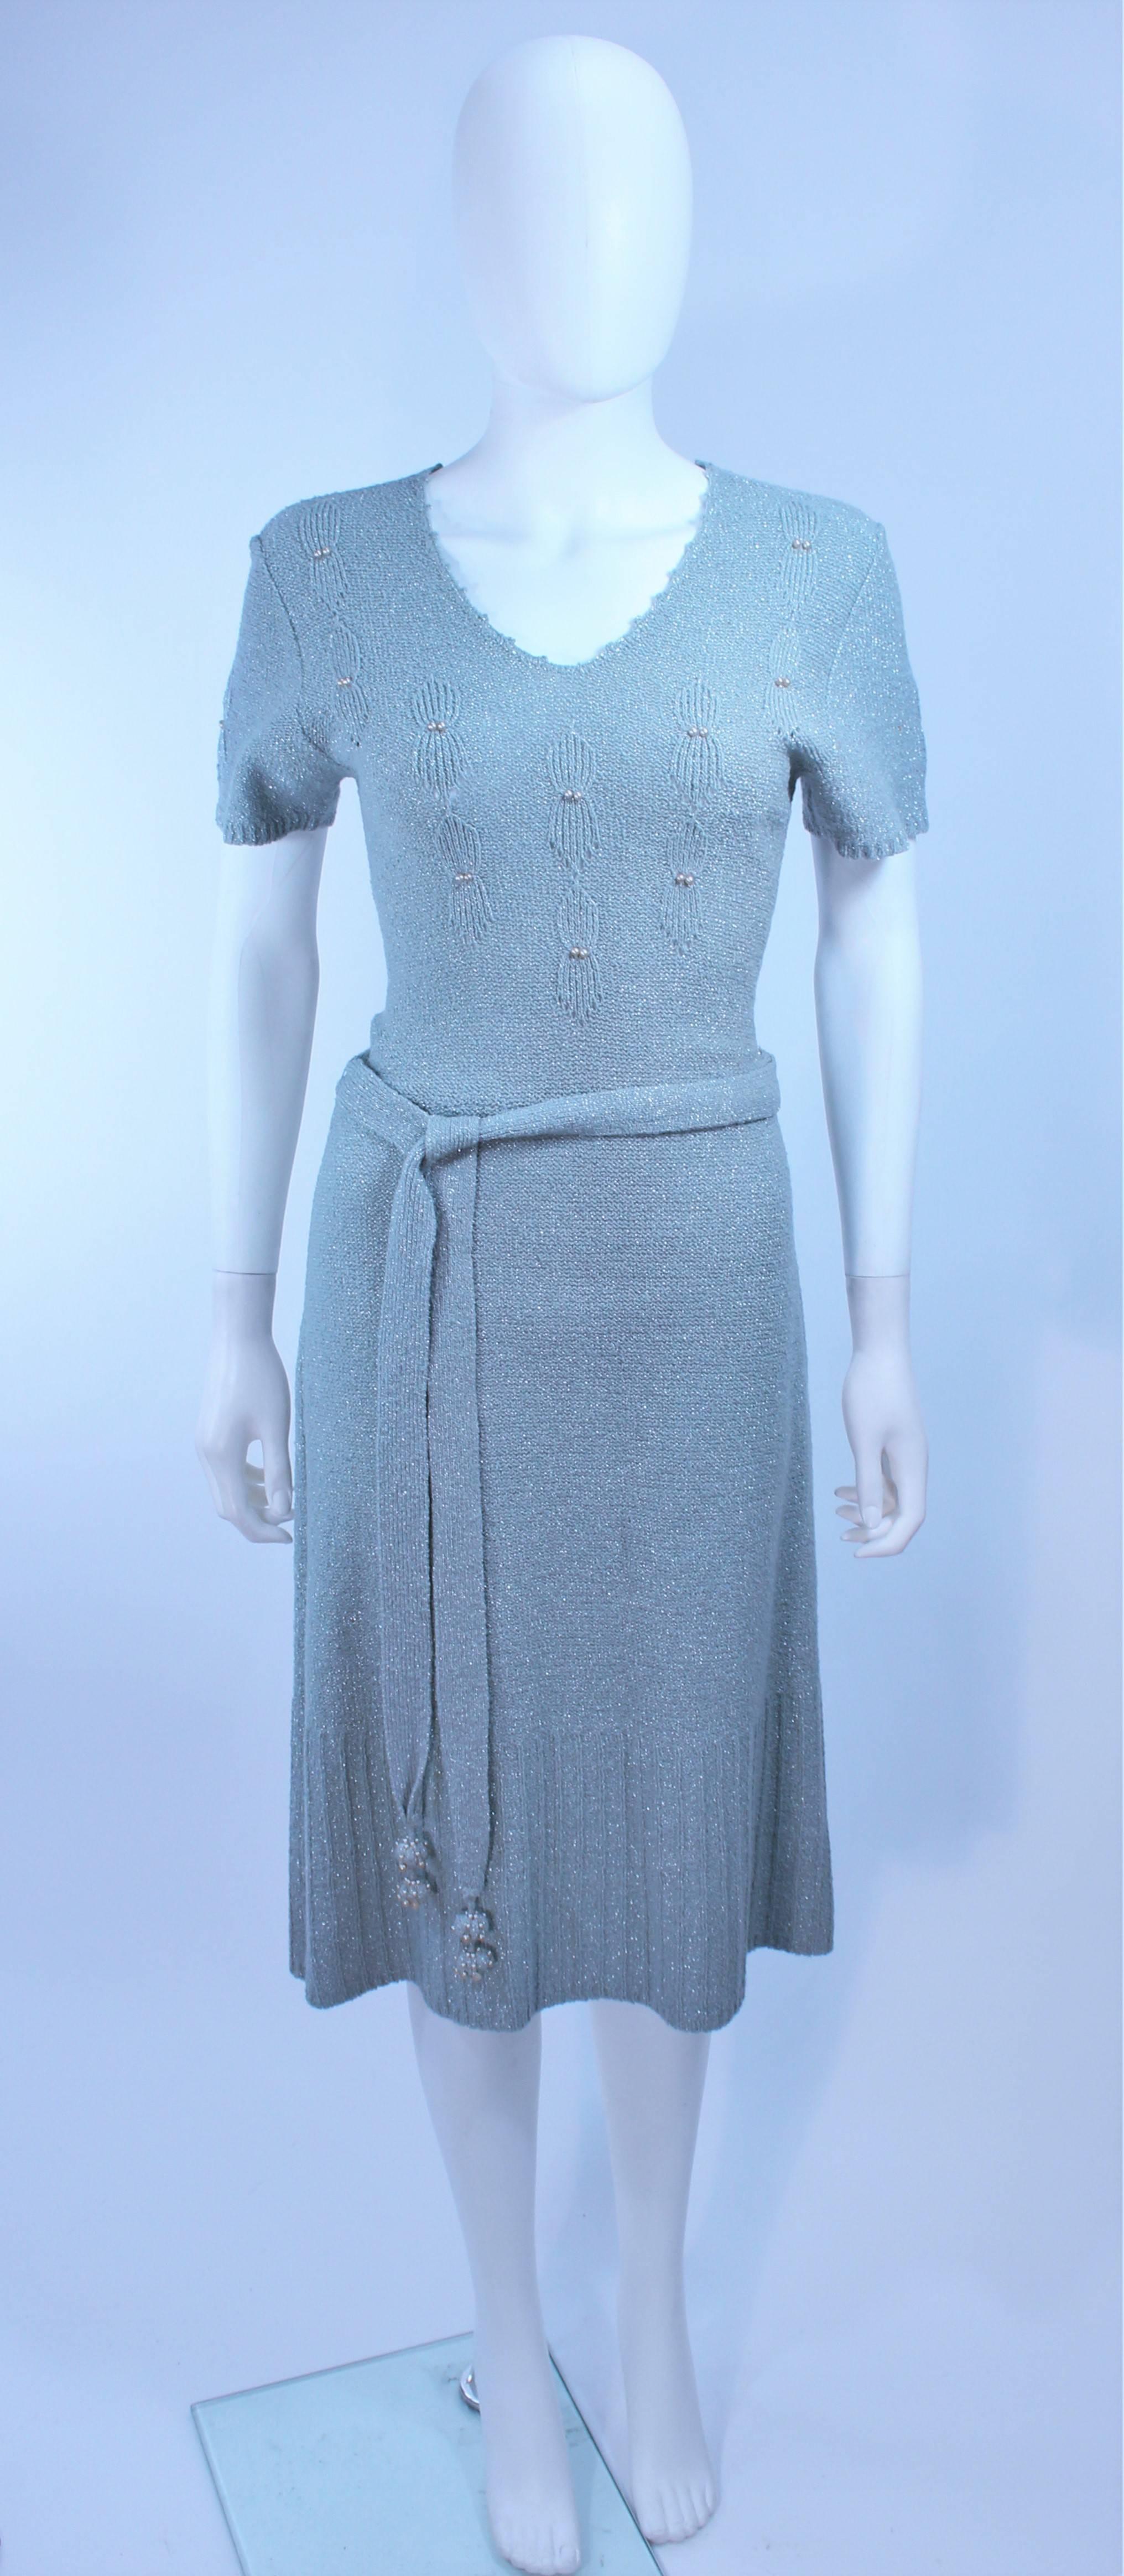 This dress is composed of a blue knit wool with iridescent accents. Features pearl accents and a belt. In excellent vintage condition.

**Please cross-reference measurements for personal accuracy. Size in description box is an